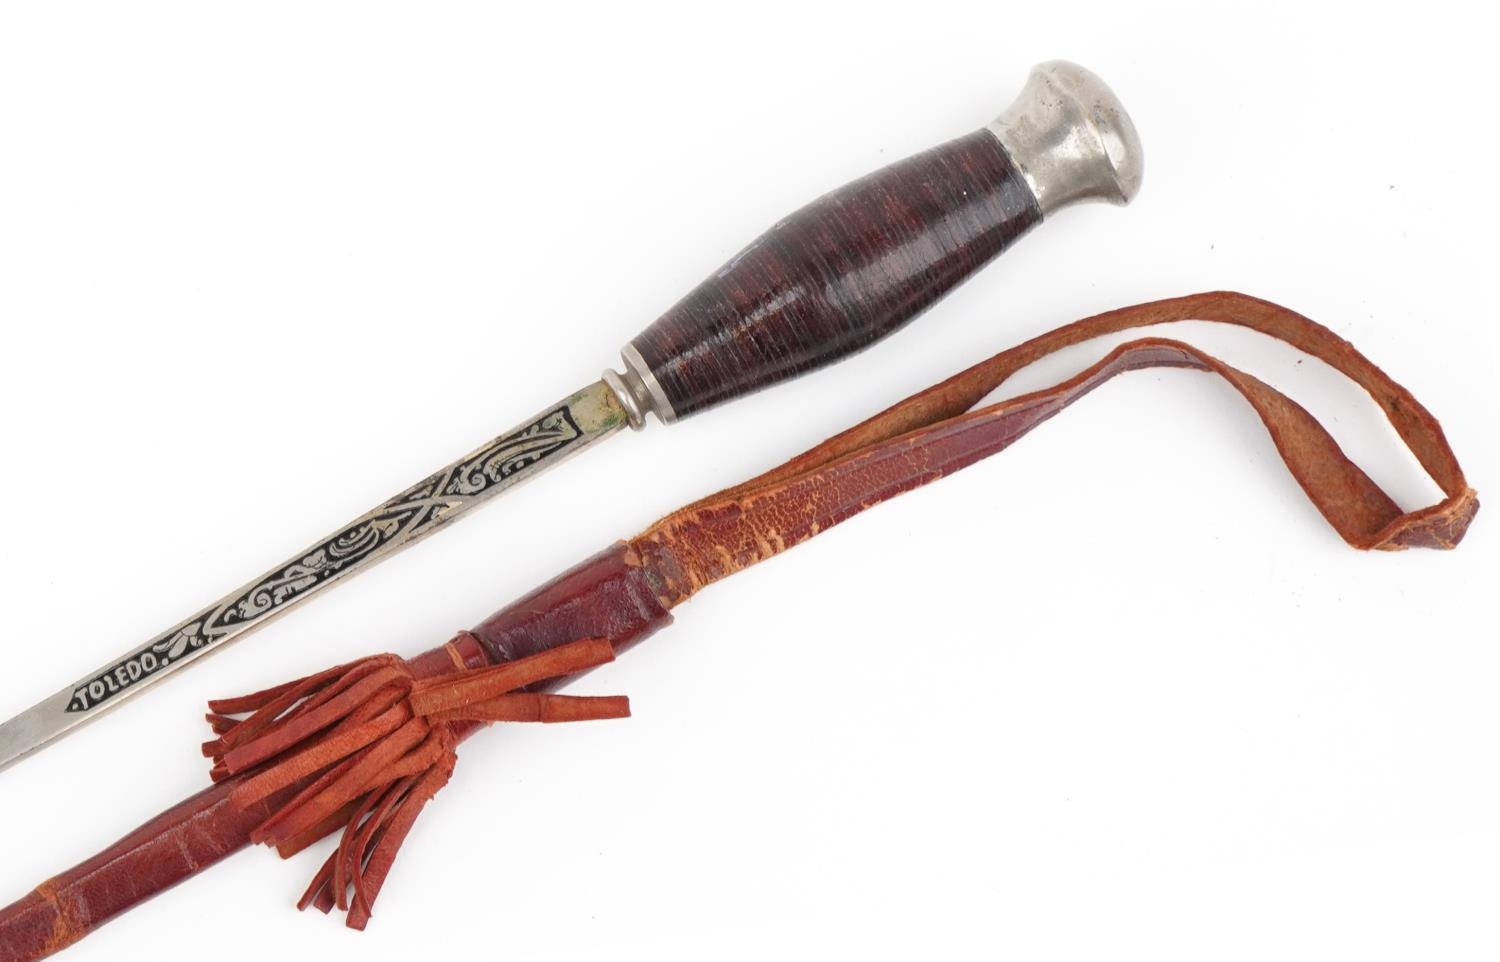 Spanish bull fighting souvenir sword with leather sheath and Toledo blade, 68.5cm in length